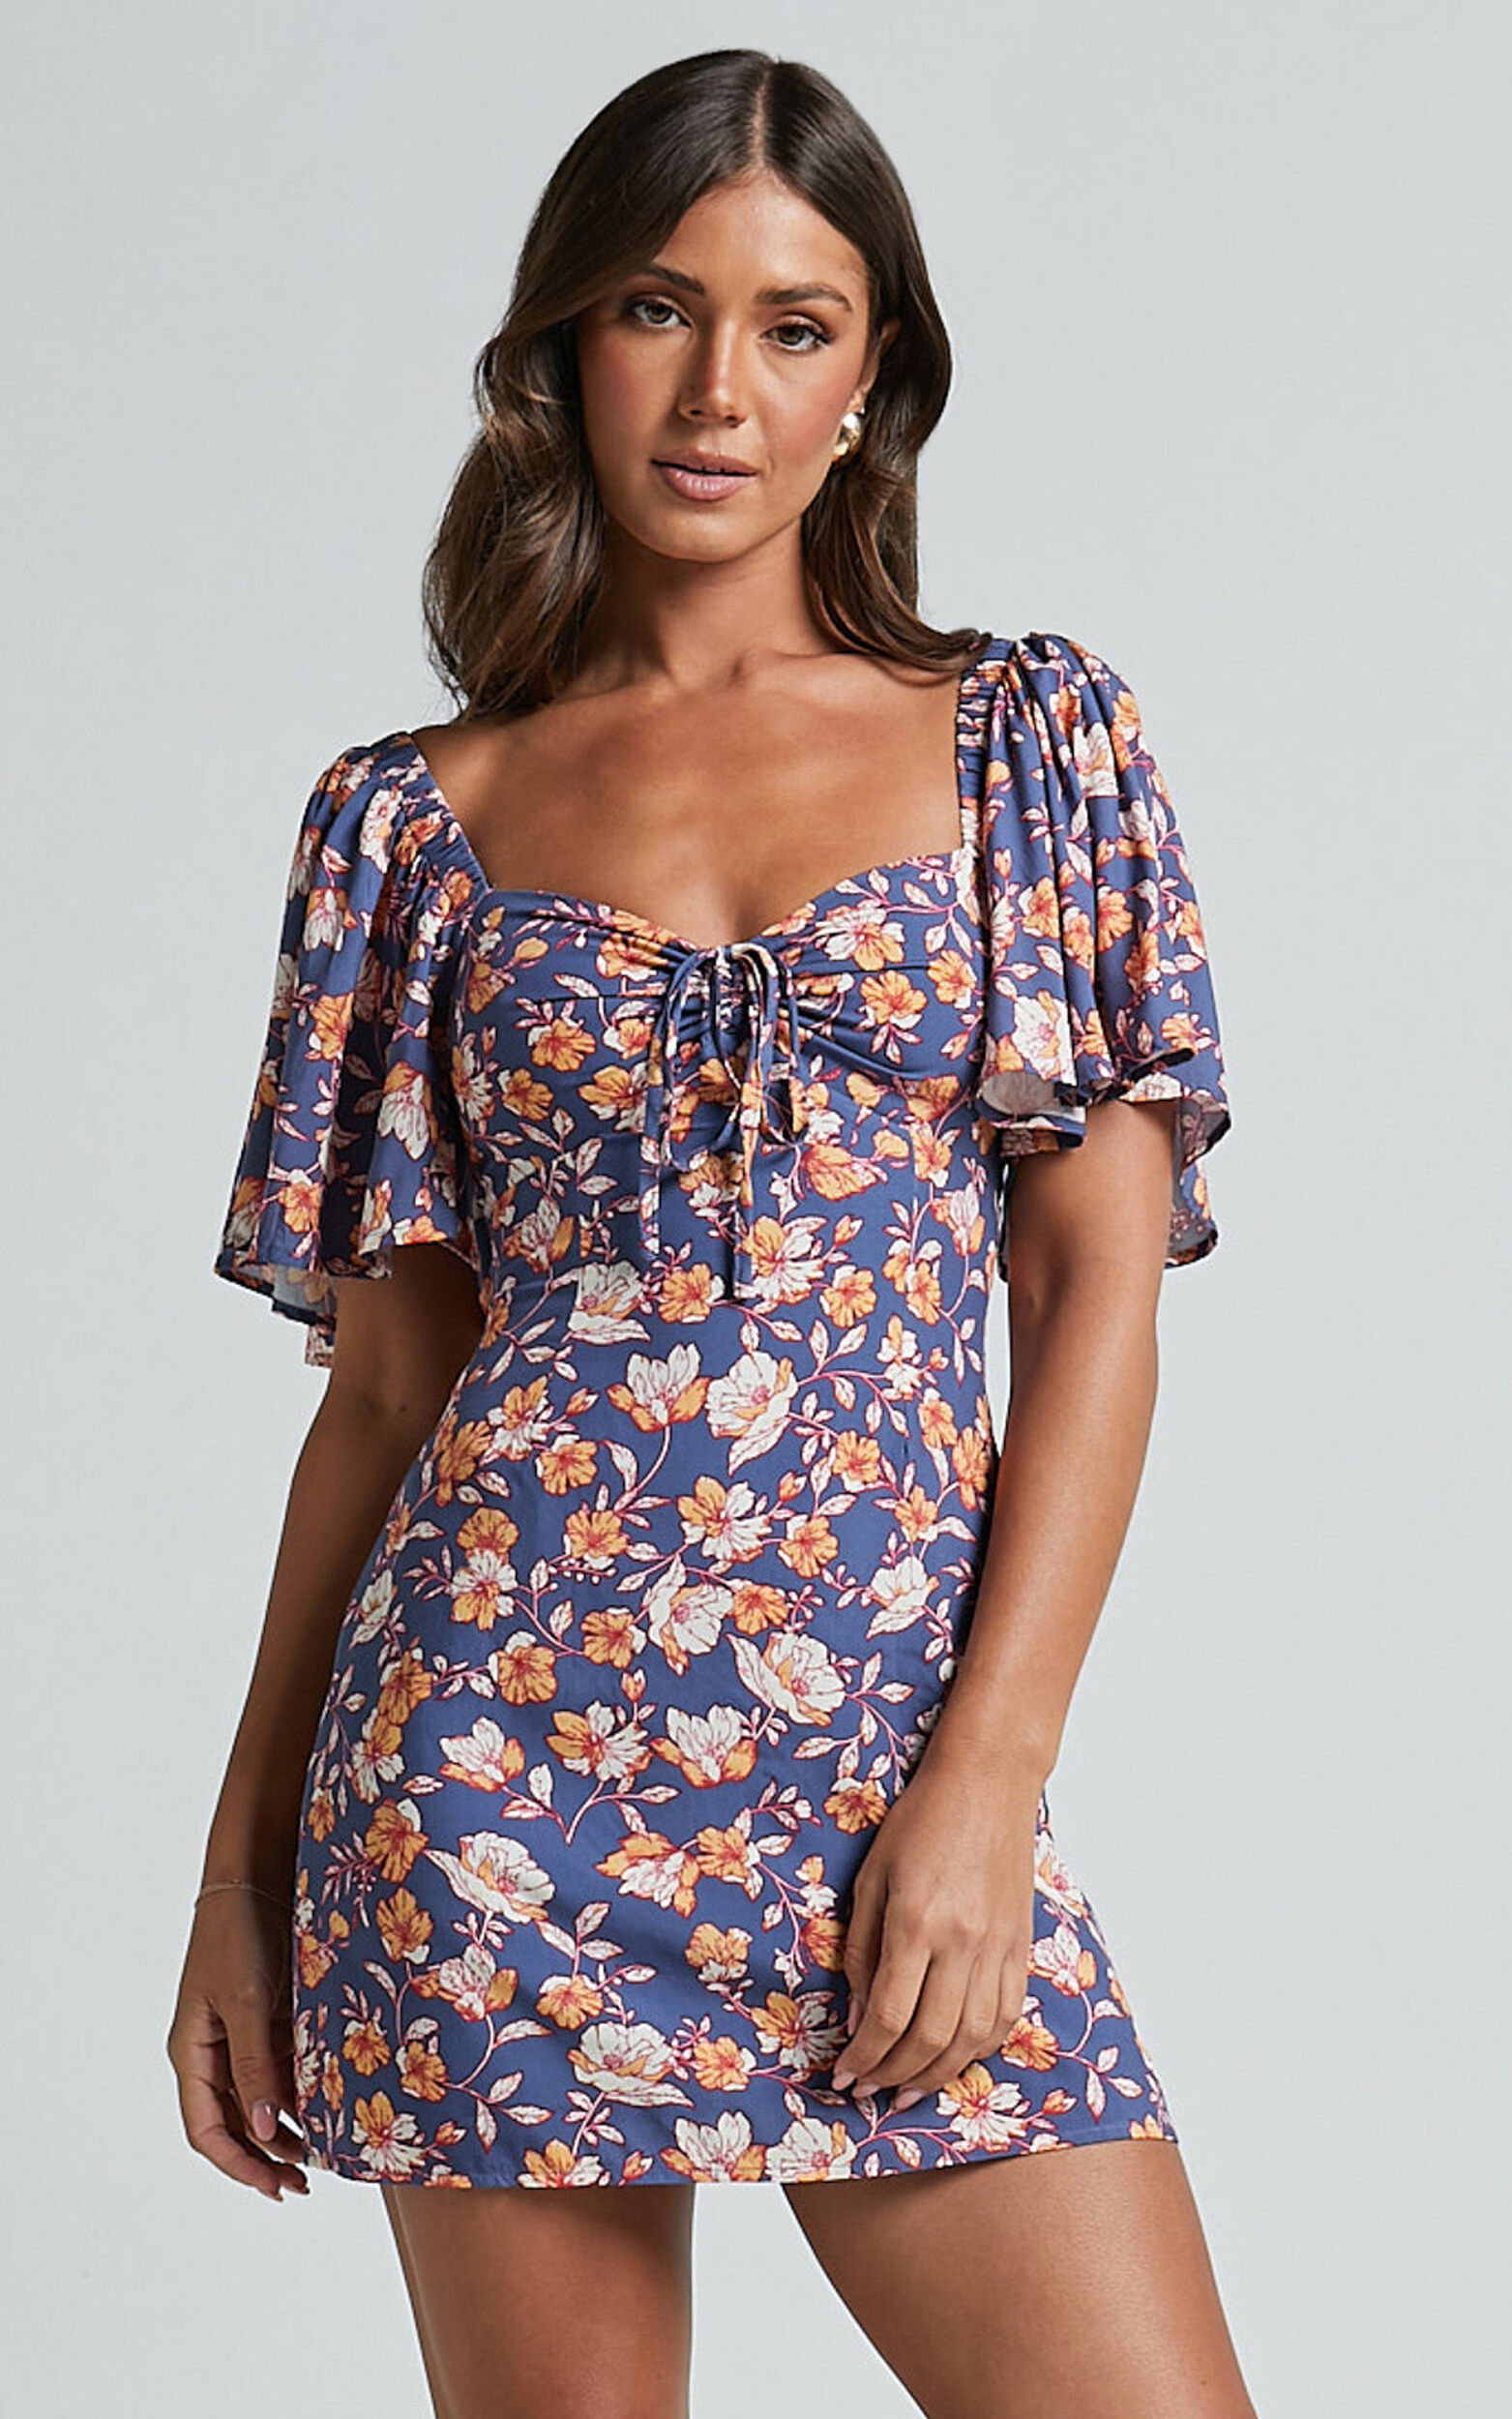 Ceriana Mini Dress - Flutter Sleeve Gathered Chest Dress in Navy Floral - 06, NVY1